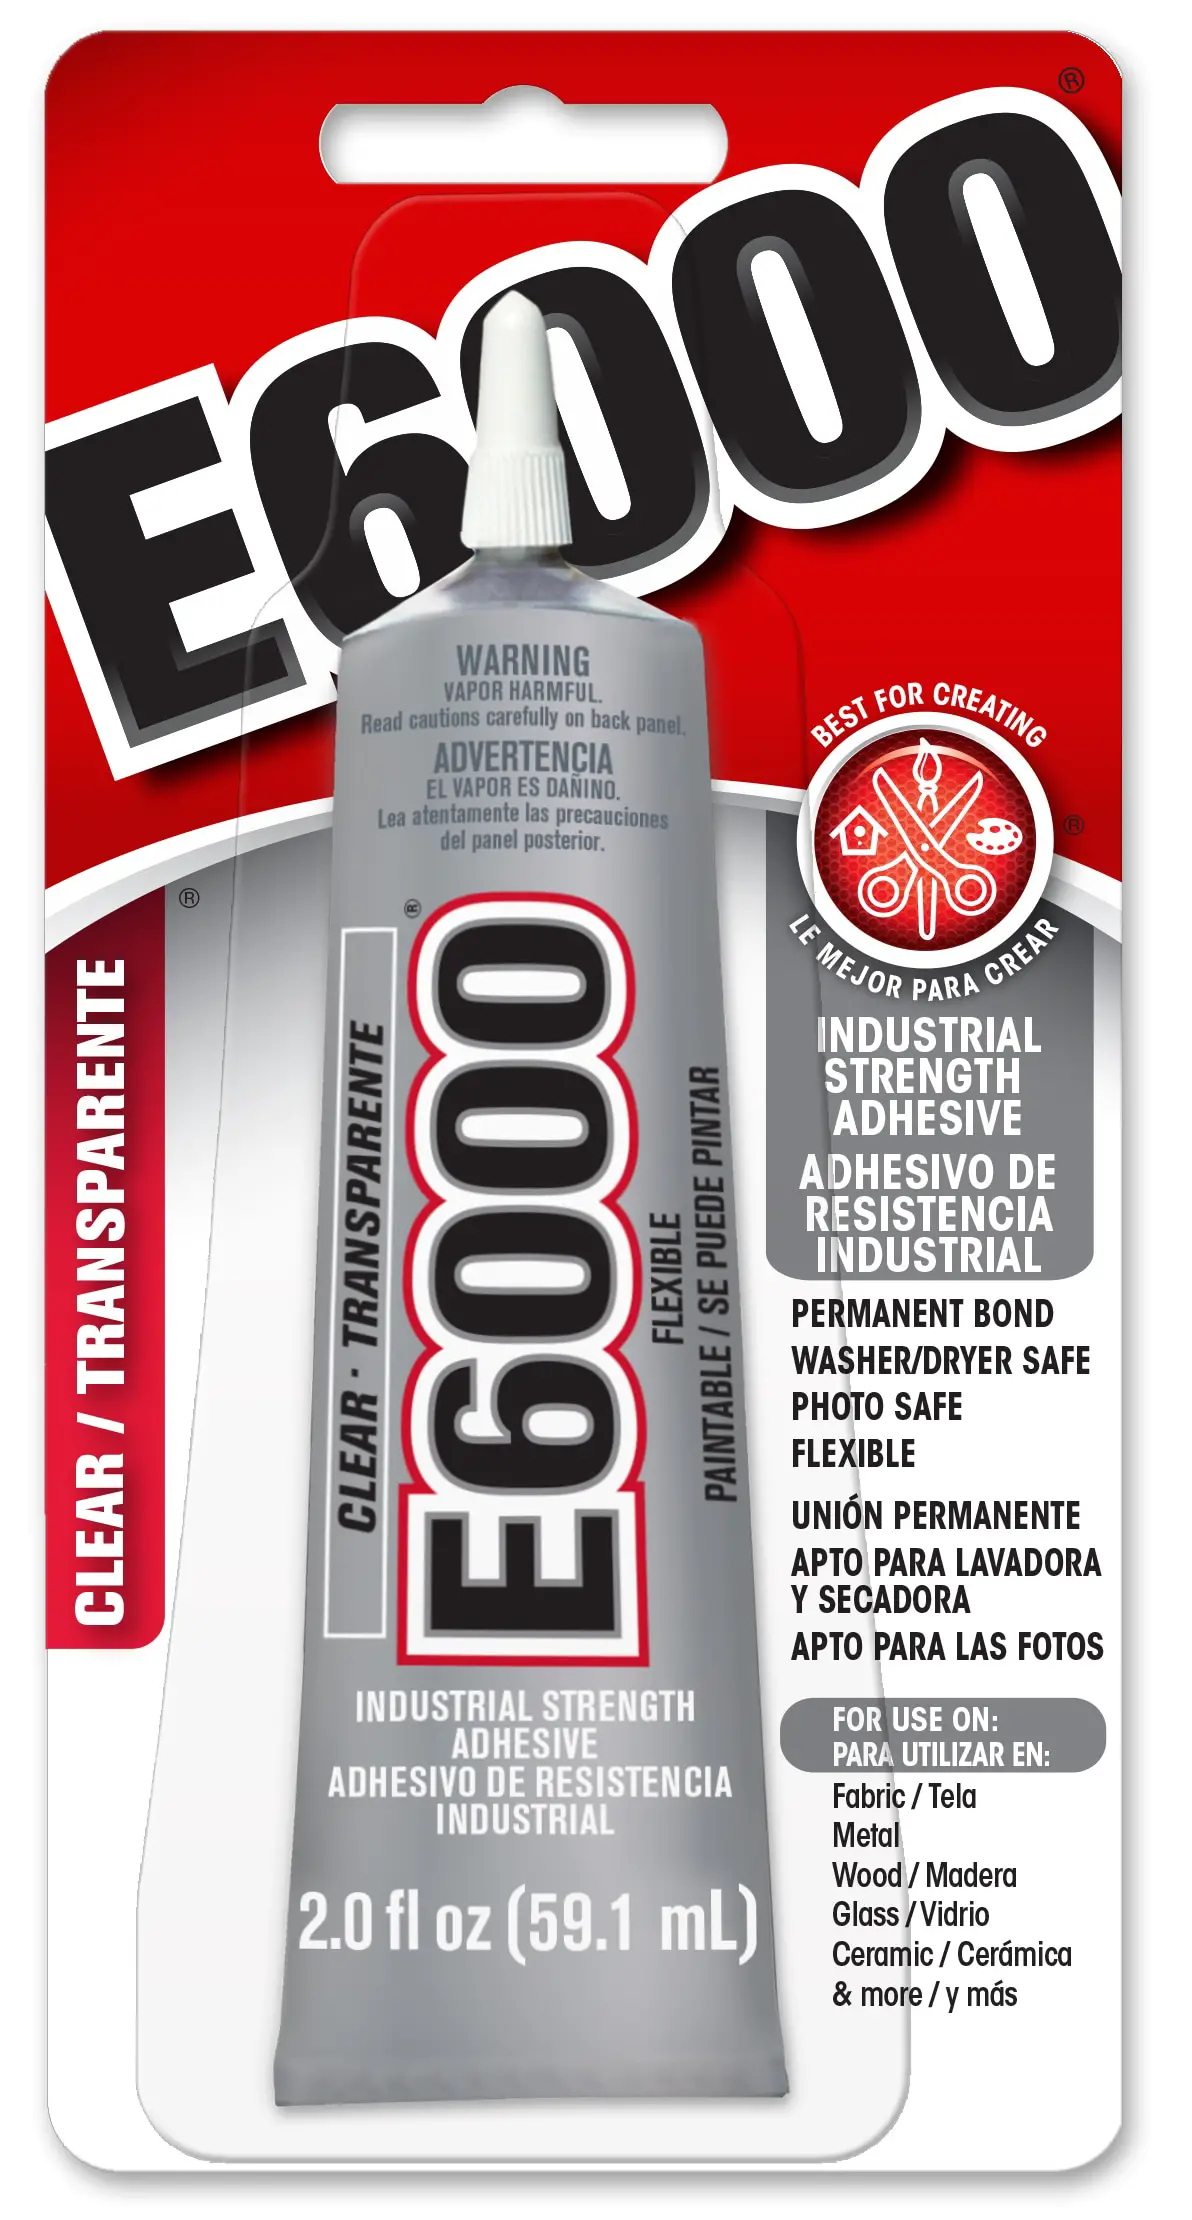 What Type Of Glue Is E6000